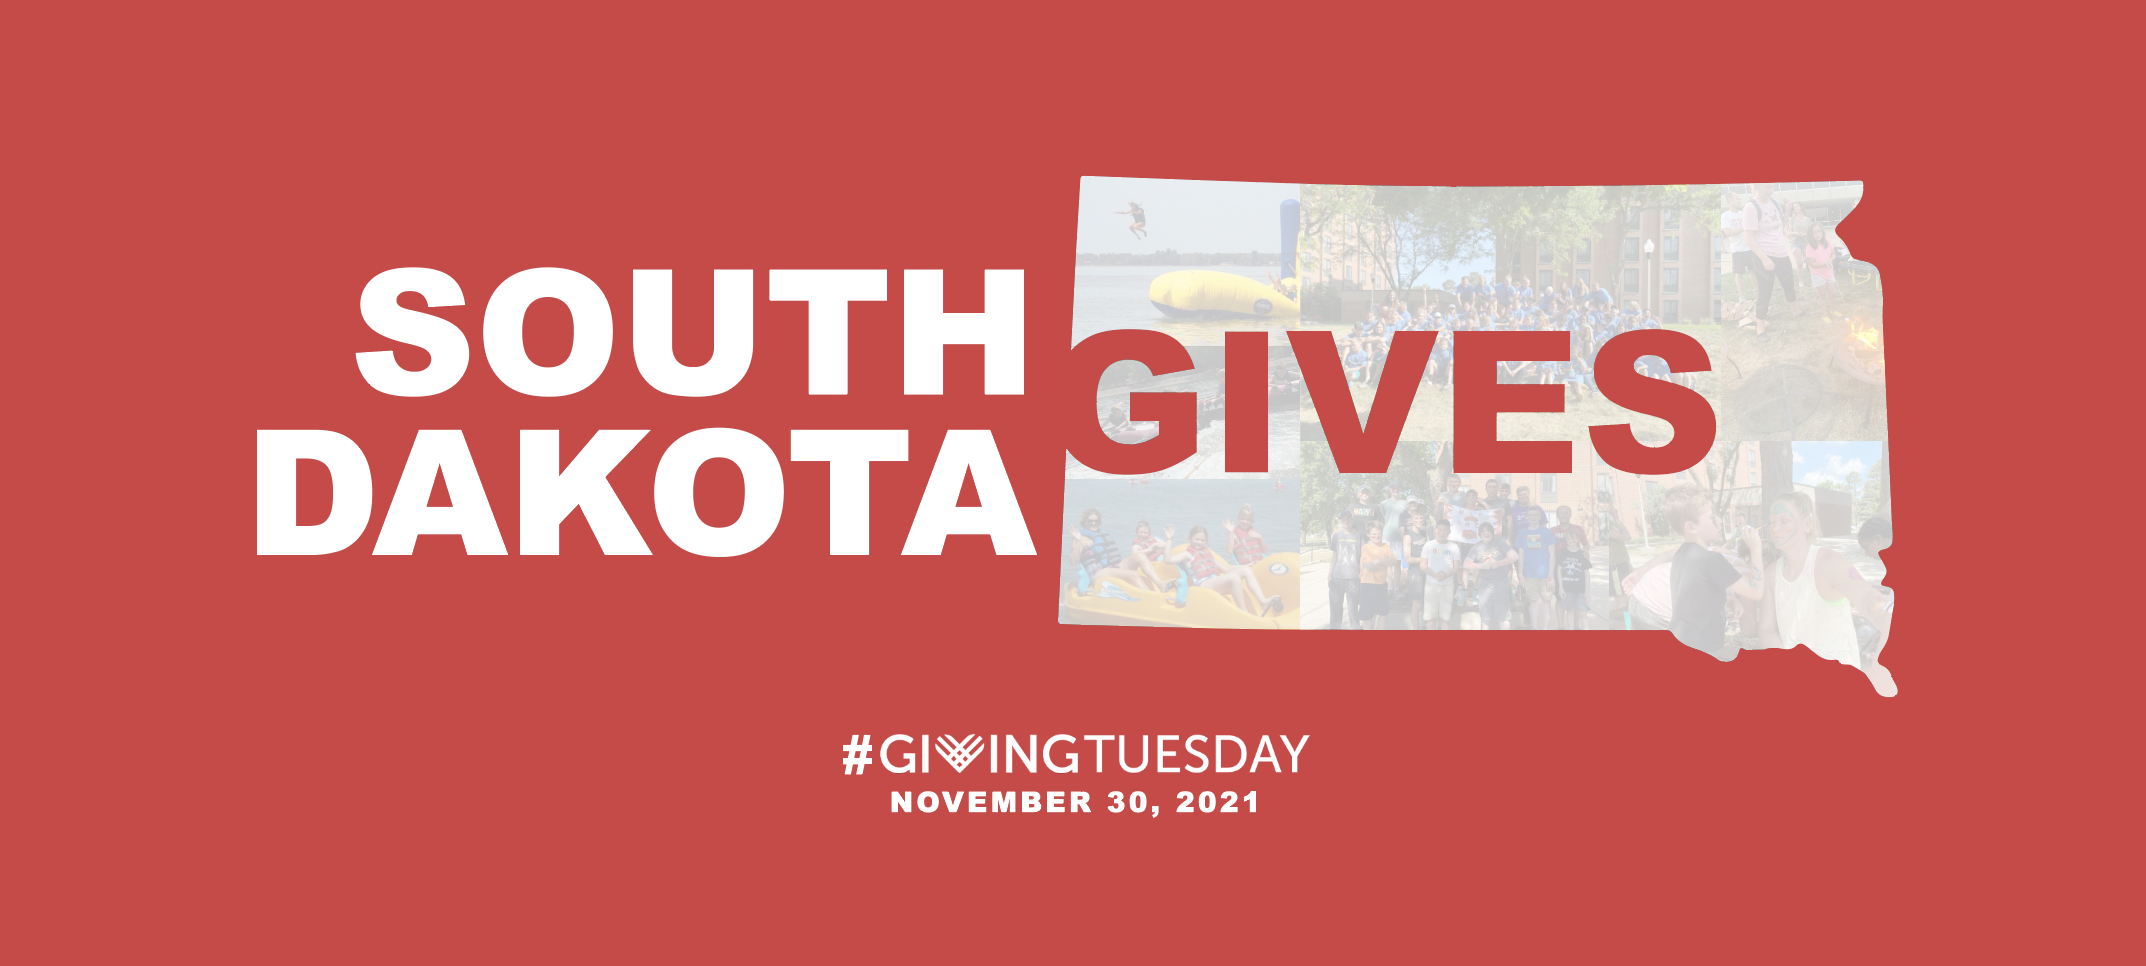 Collage of images within the shape of South Dakota state map with white text "South Dakota" and red text "Gives" in one row. Another row has image of Giving Tuesday logo and date November 30, 2021. Image is featured on red background.